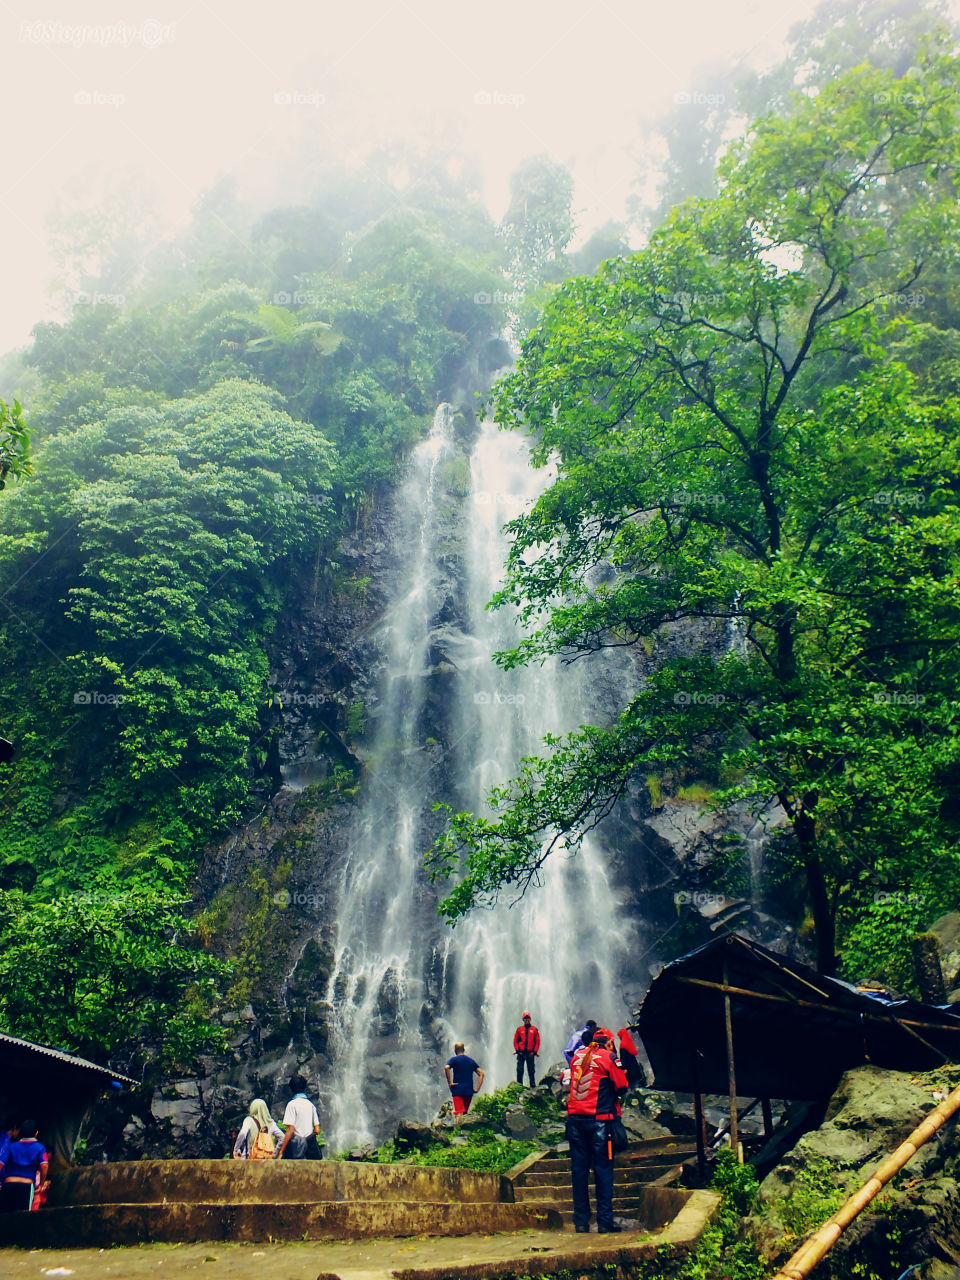 Cigamea Waterfall. Cigamea Waterfall. One of many waterfall destinations in Bogor, West Java, Indonesia.